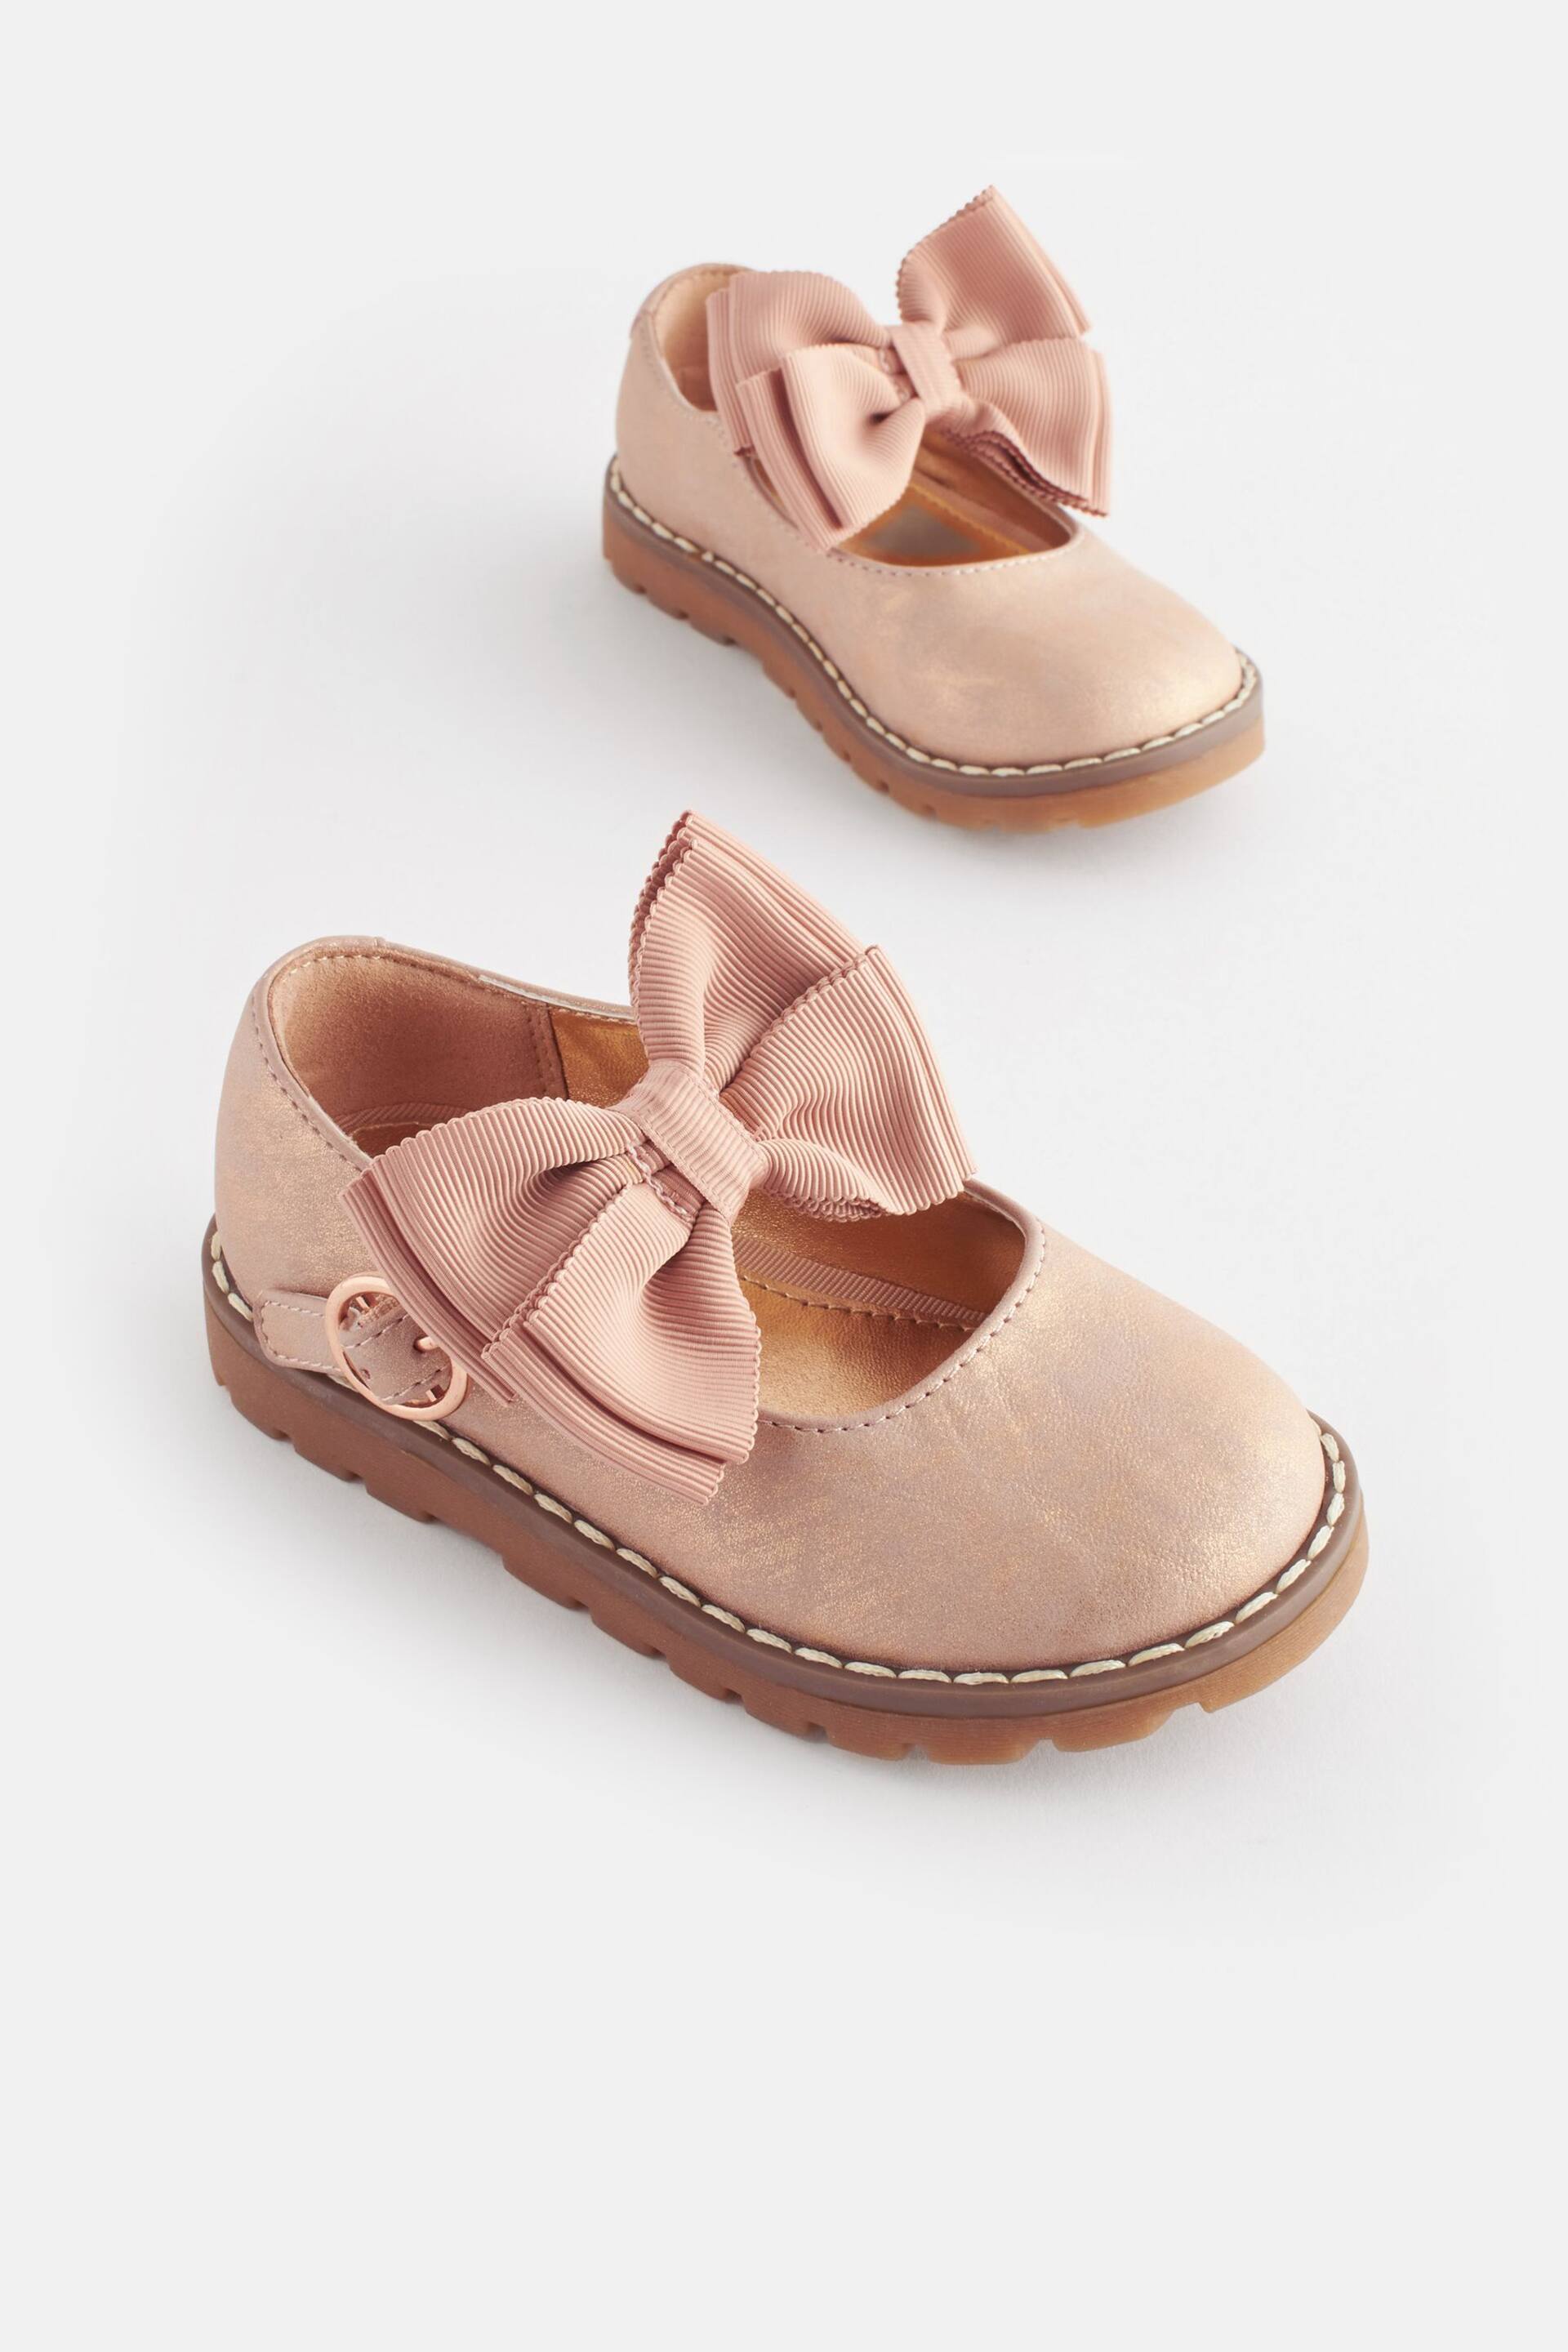 Pink Mary Jane Bow Shoes - Image 1 of 6